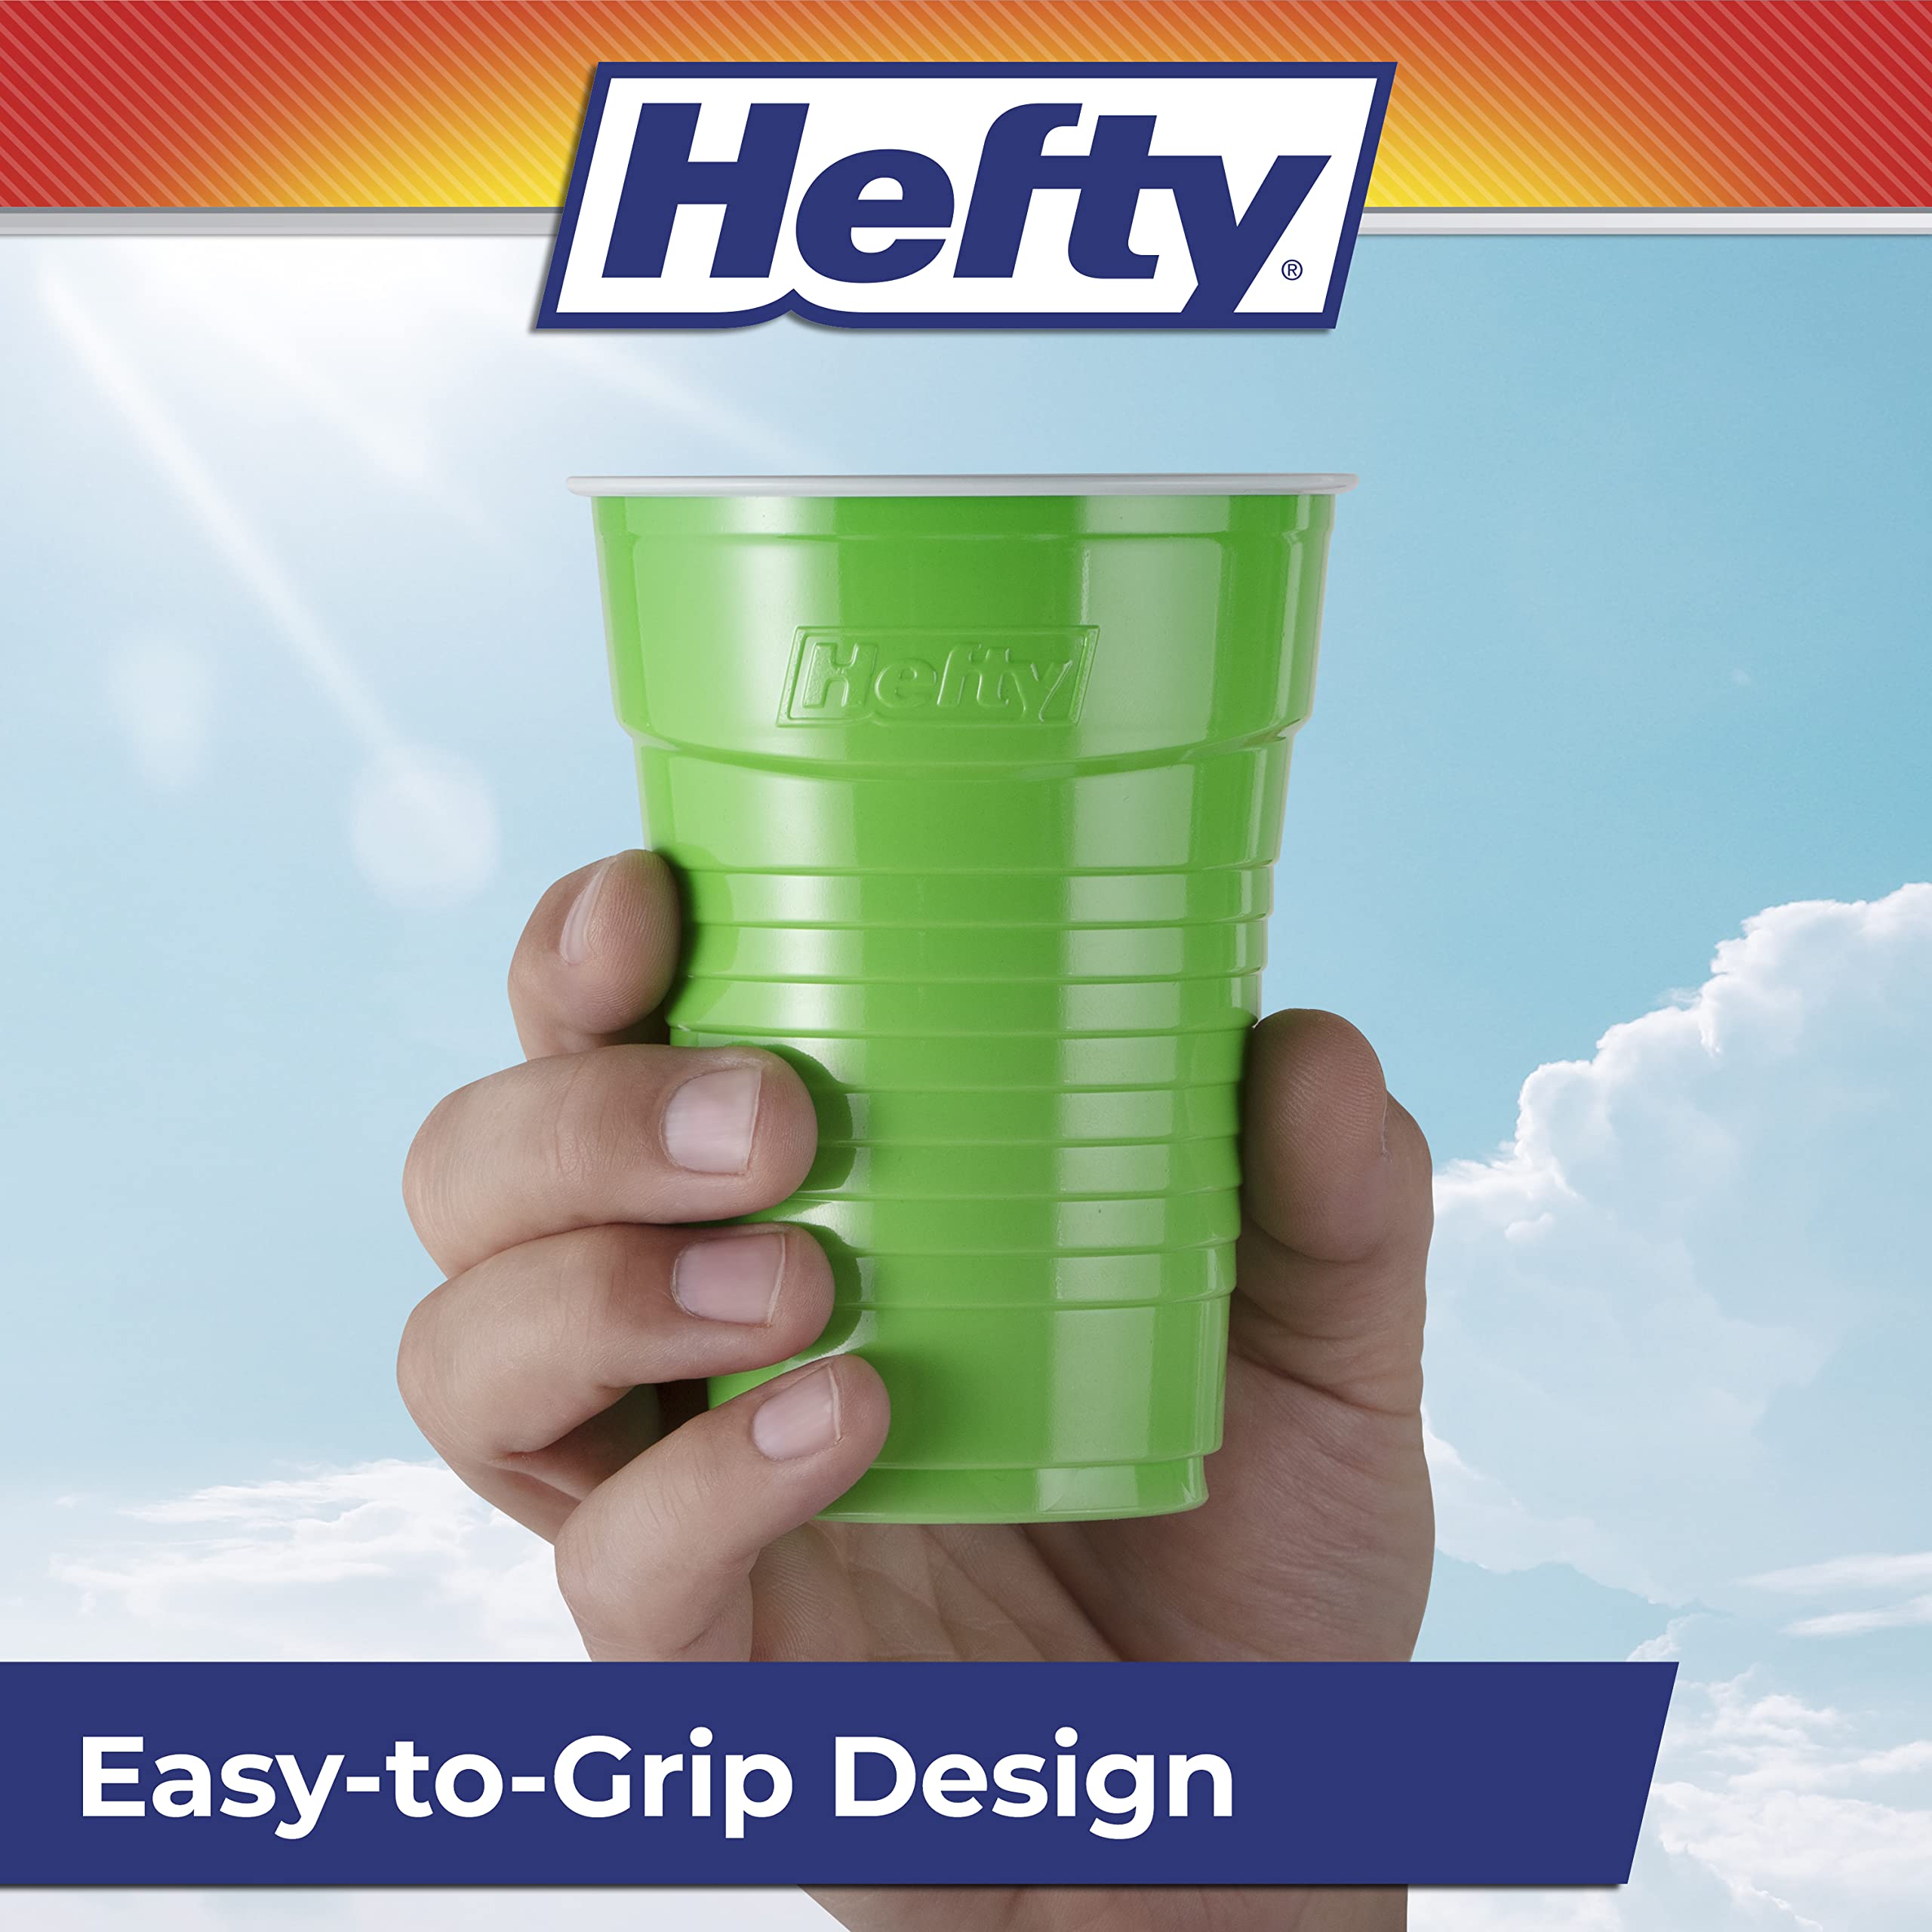 Hefty Everyday 16 oz Disposable Party Cup, 101 Count (Pack of 1), Assorted Bright